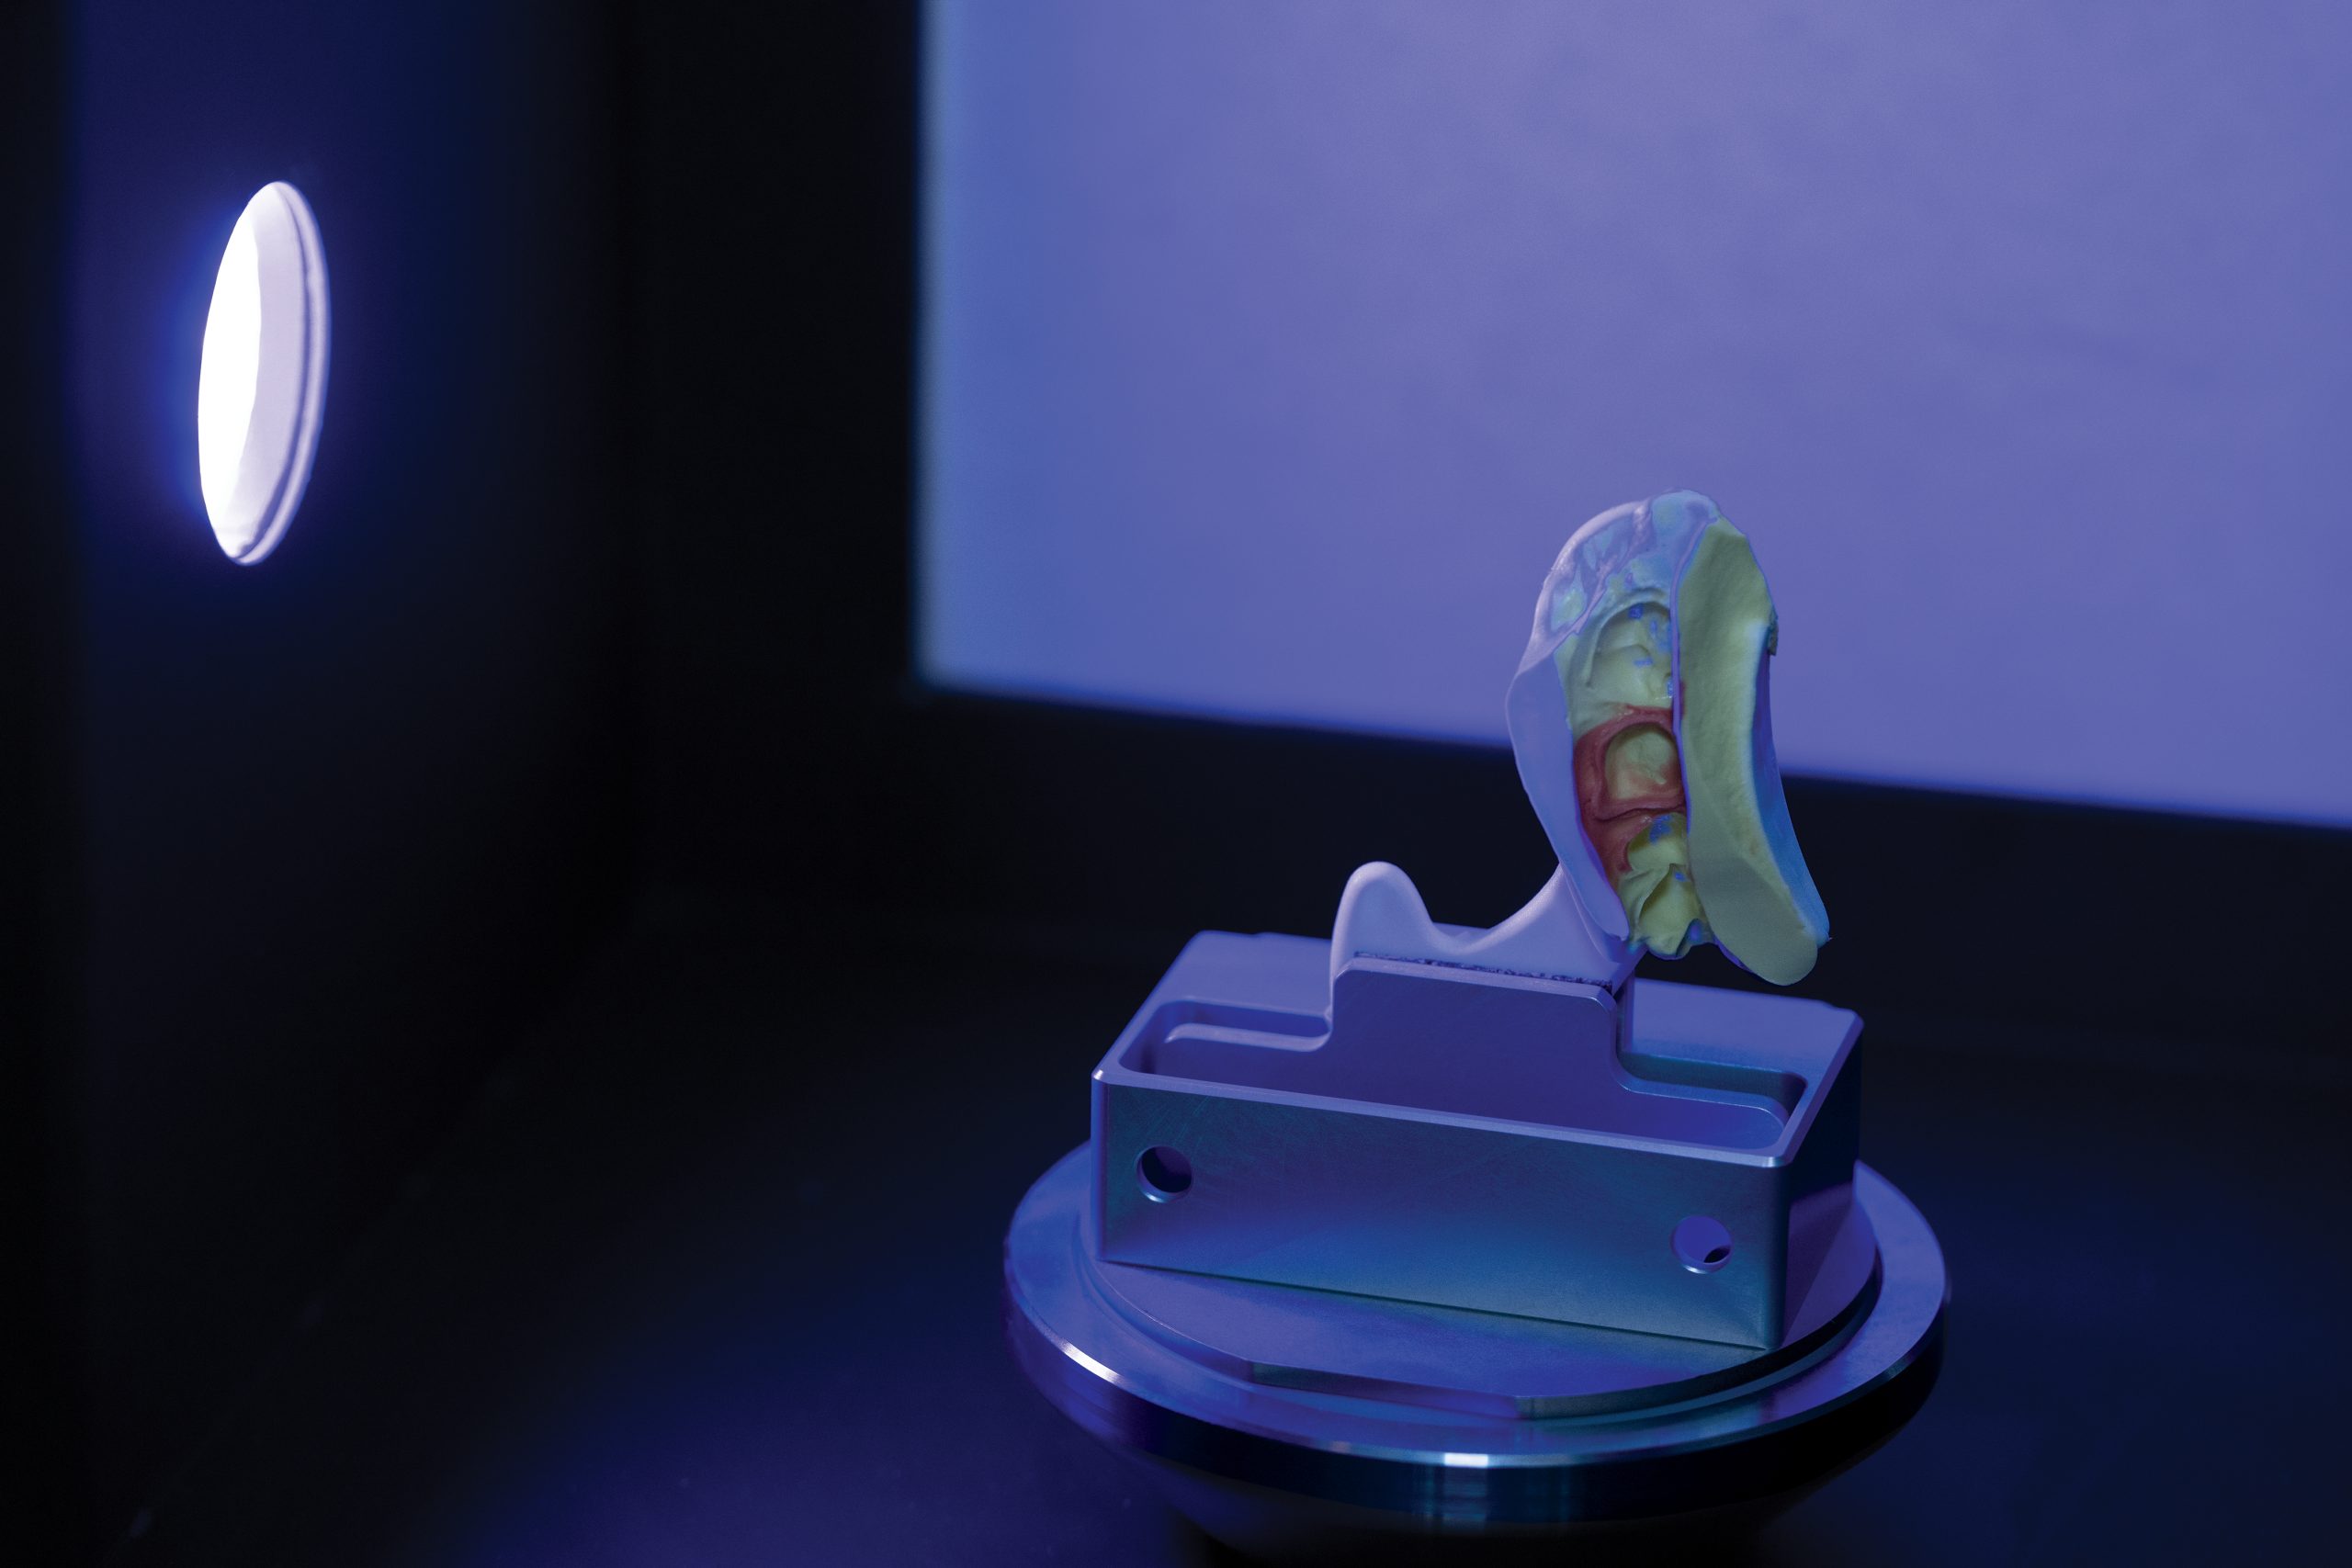 How a Dental Lab is Shaking Up CT Scanning